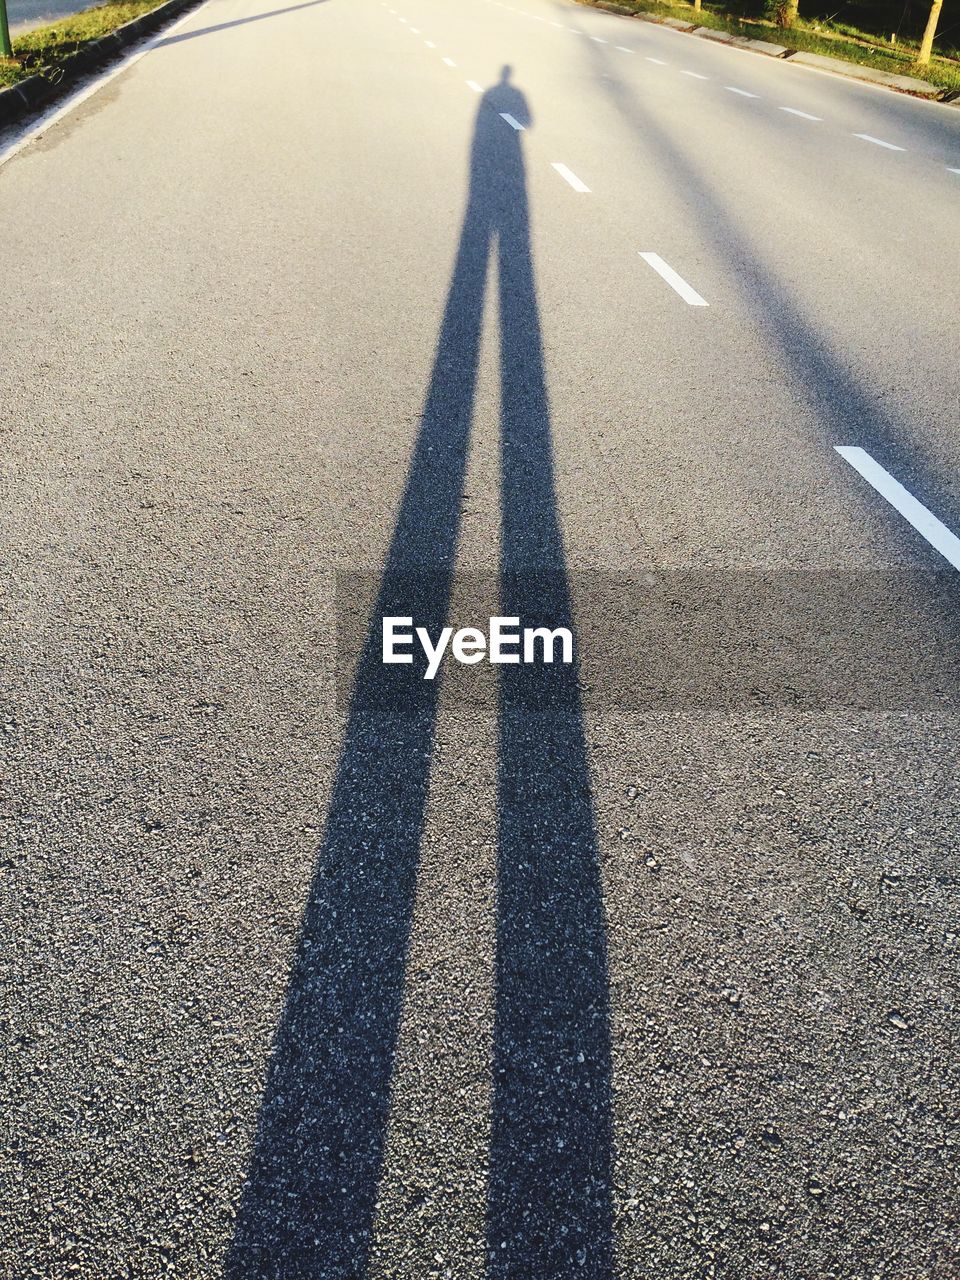 SHADOW OF PERSON ON ROAD